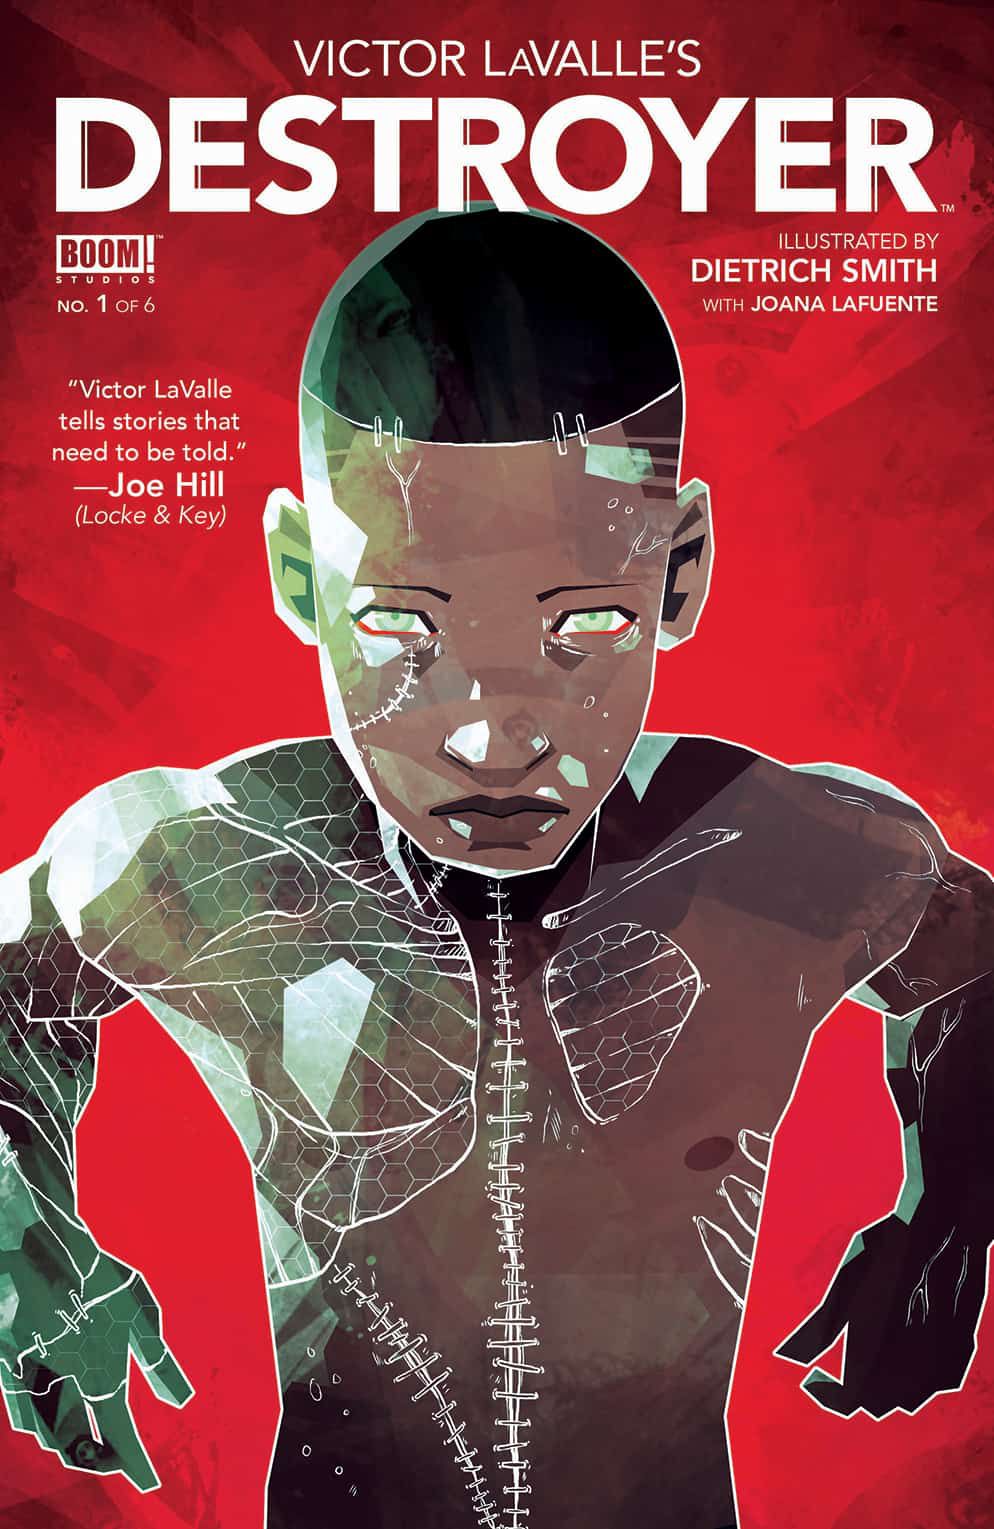 The cover for Victor LaValle’s Destroyer